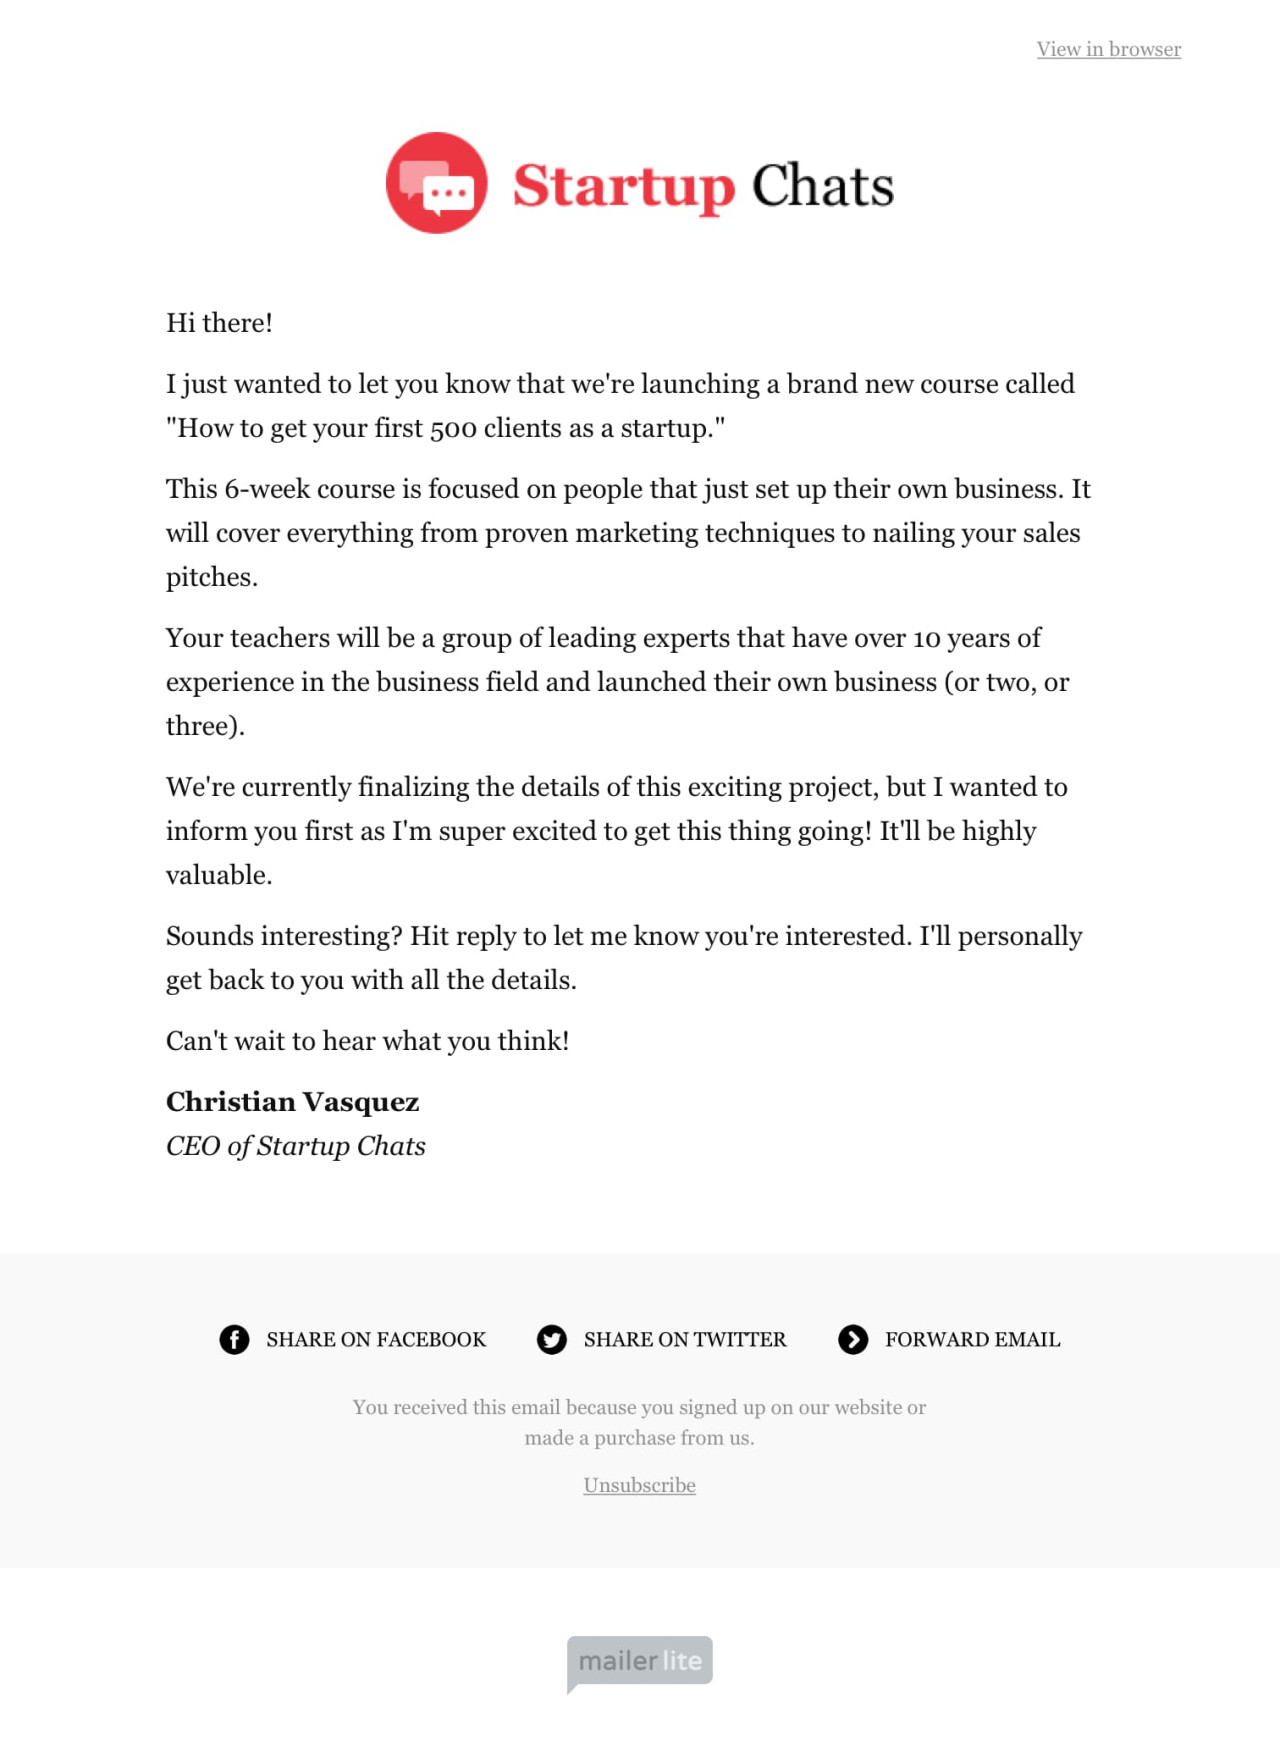 Letter template - Made by MailerLite